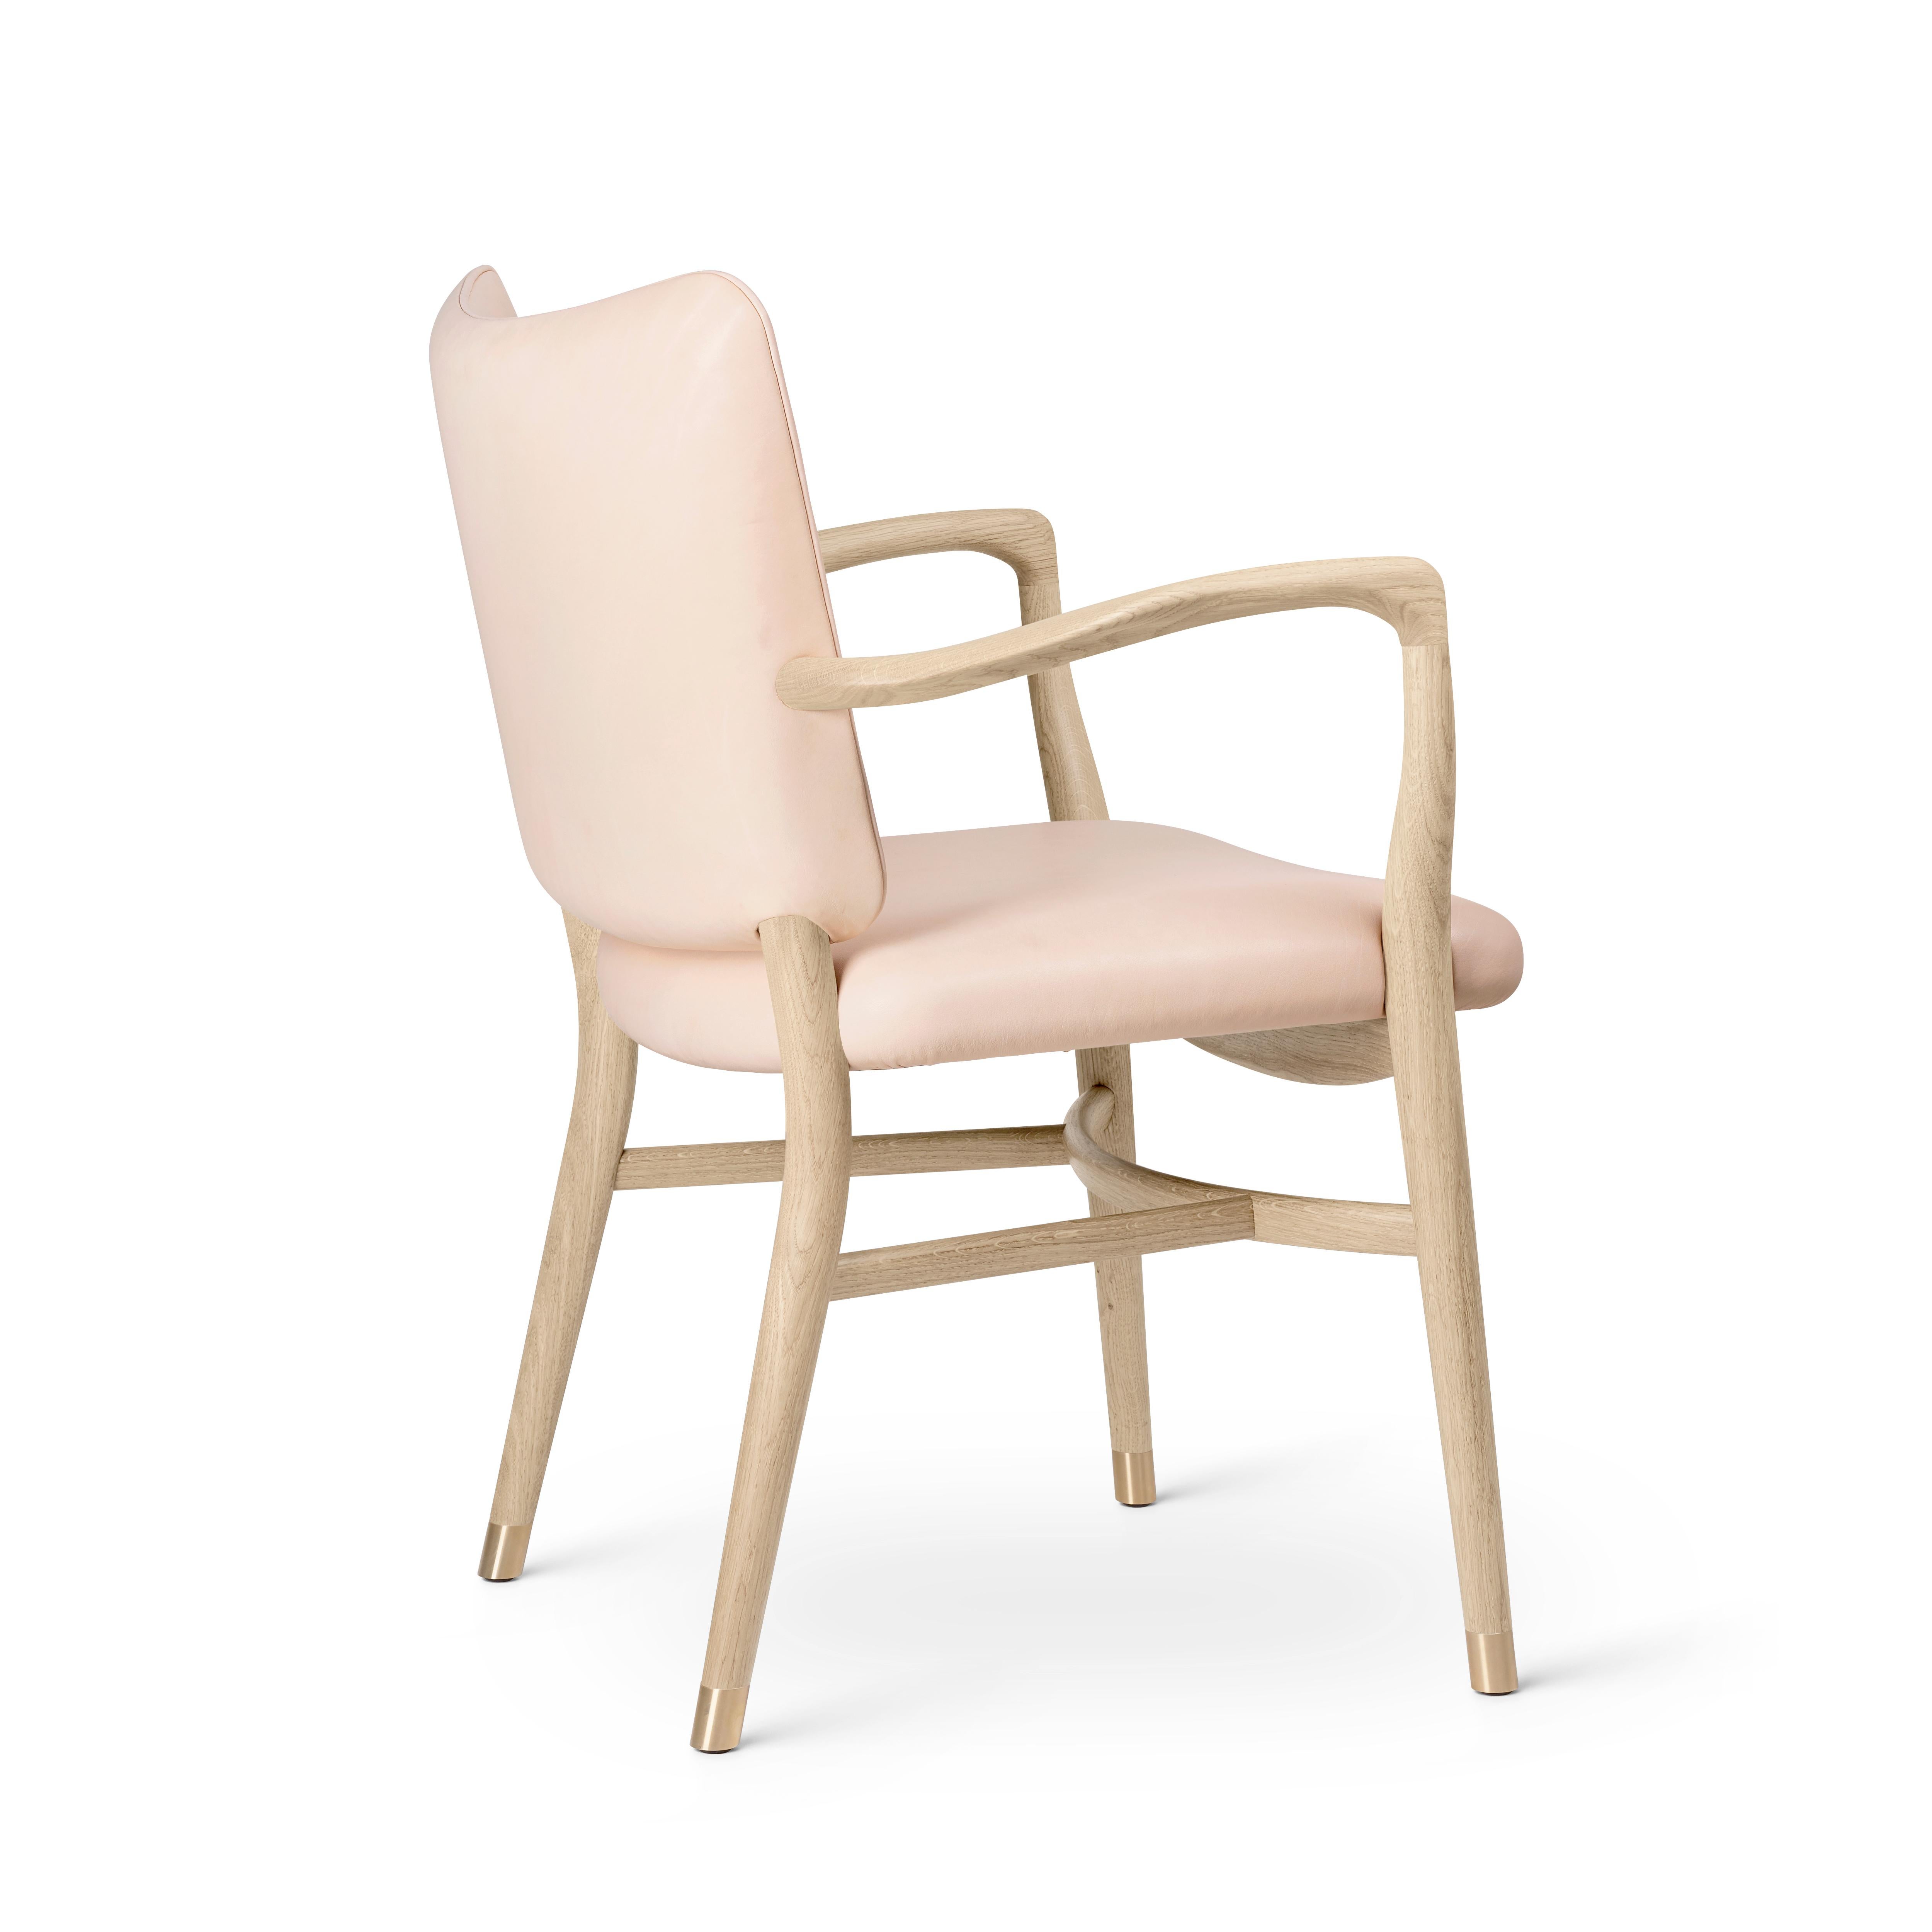 Vilhelm Lauritzen 'VLA61' Chair in Oak Soap and Leather for Carl Hansen & Son.

The story of Danish Modern begins in 1908 when Carl Hansen opened his first workshop. His firm commitment to beauty, comfort, refinement, and craftsmanship is evident in